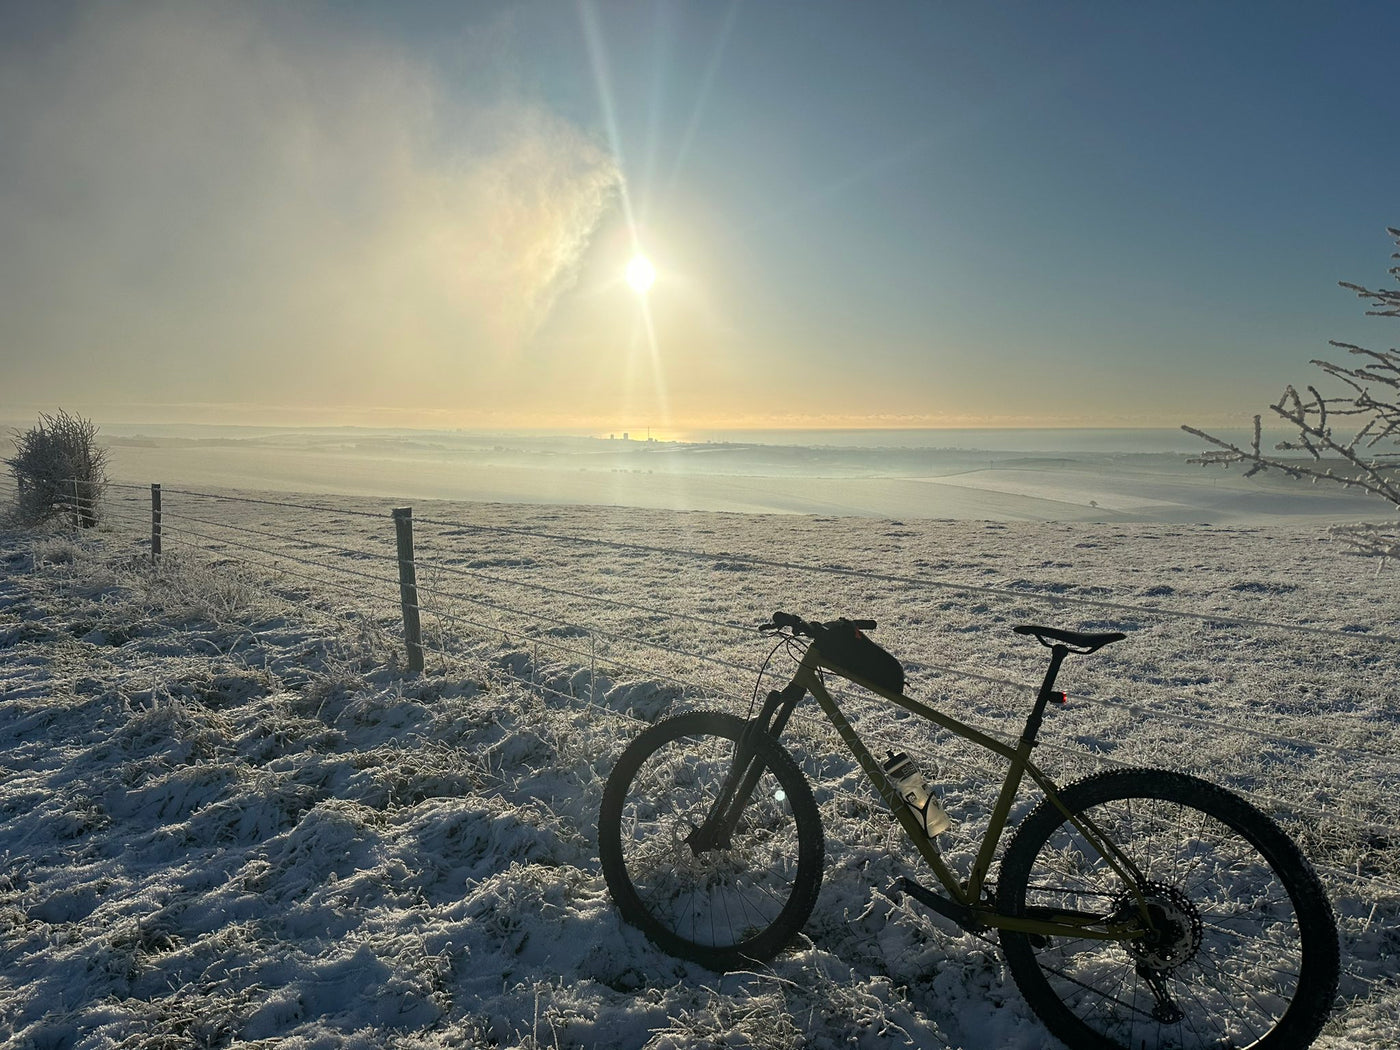 Cycling in winter, bicycle in a snowy field with hazy sunshine